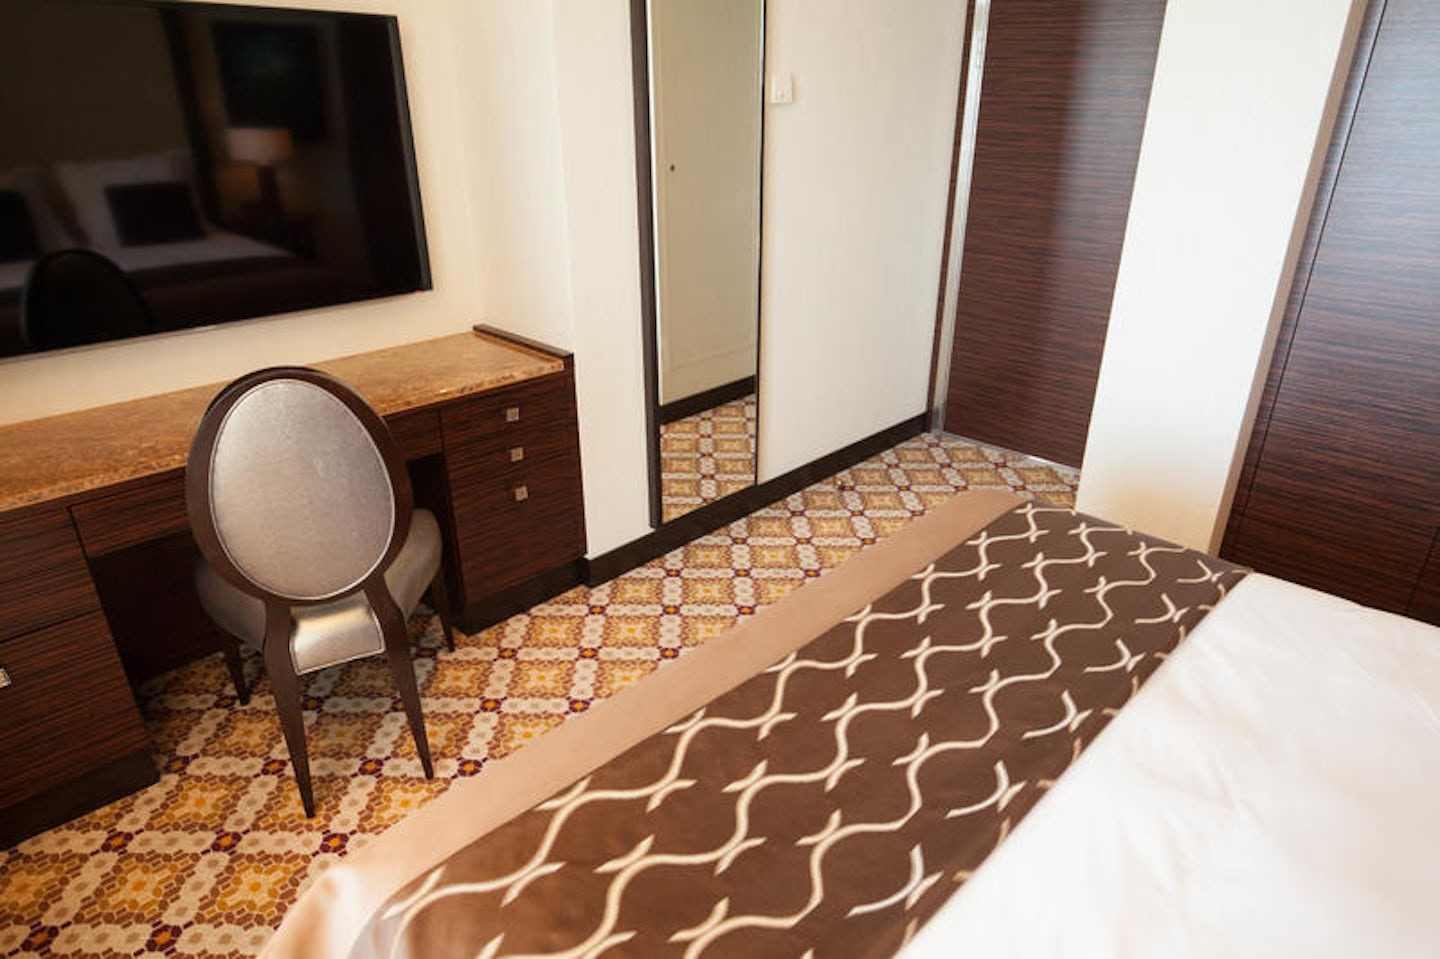 The Reflection Suite on Celebrity Reflection